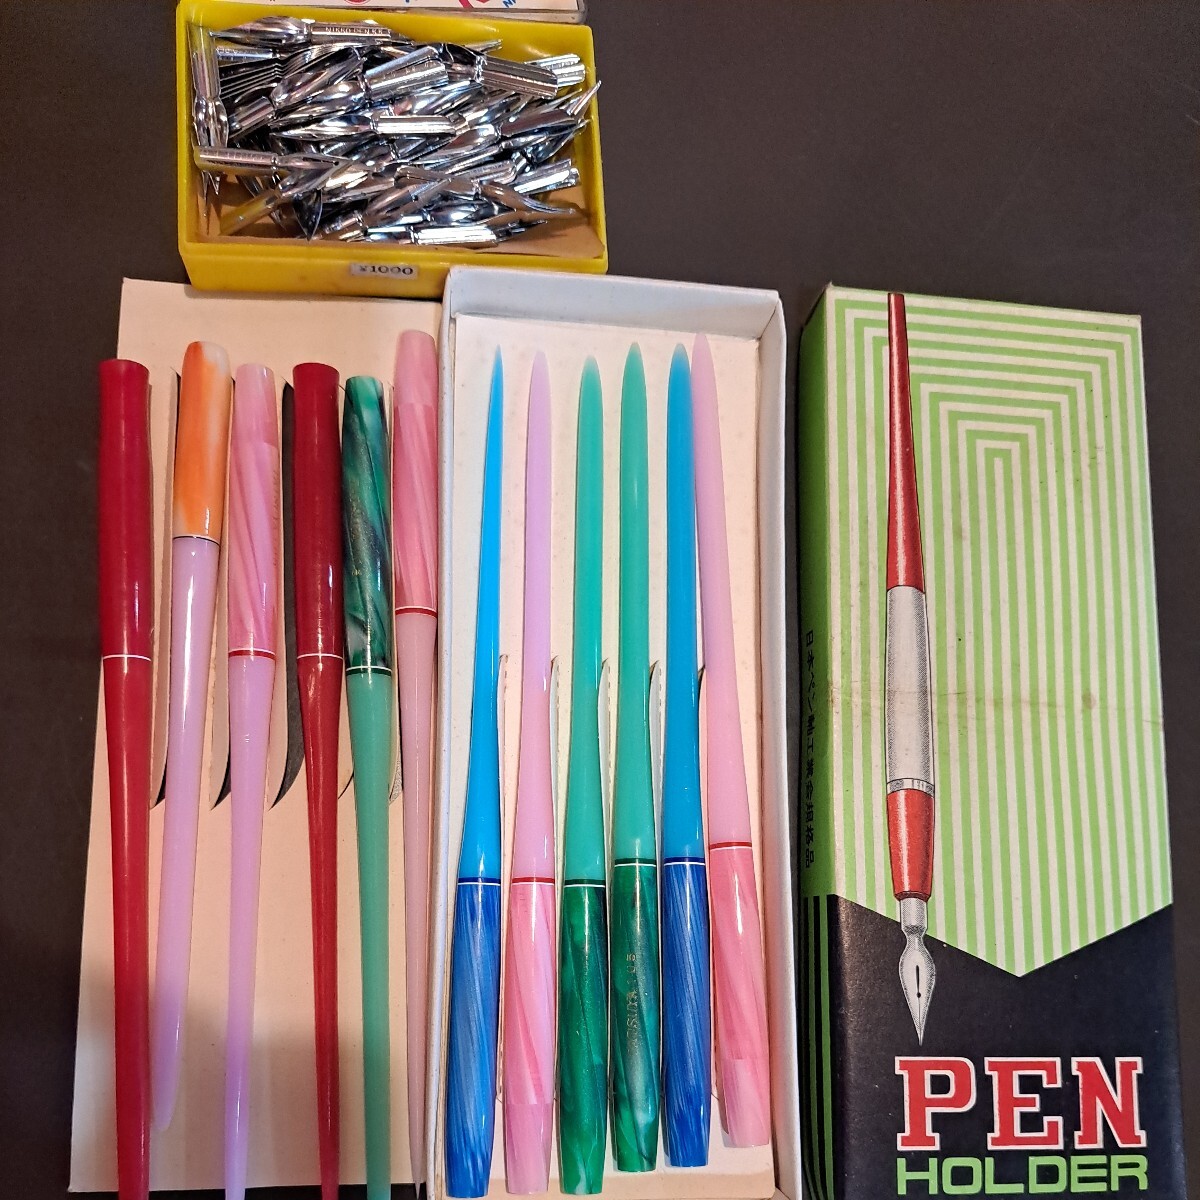  Vintage pen holder Showa Retro pen axis pen . unused new goods 1 dozen sunlight pen writing brush the other day book@ pen stationery at that time thing 